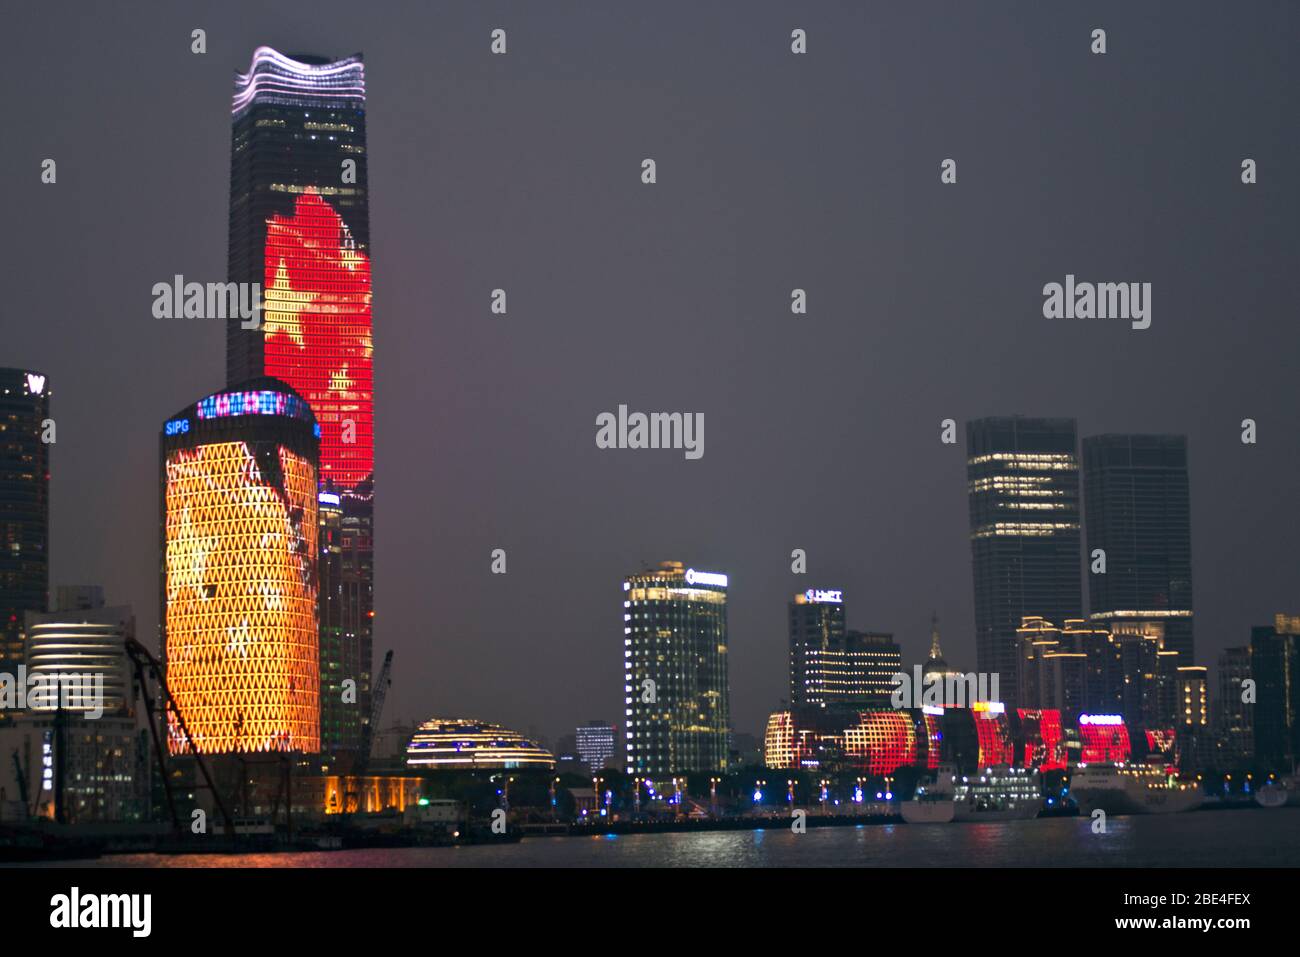 Shanghai skyscrapers at night picturing the Chinese flag, illuminated by LED lighting, view from the Bund, China Stock Photo